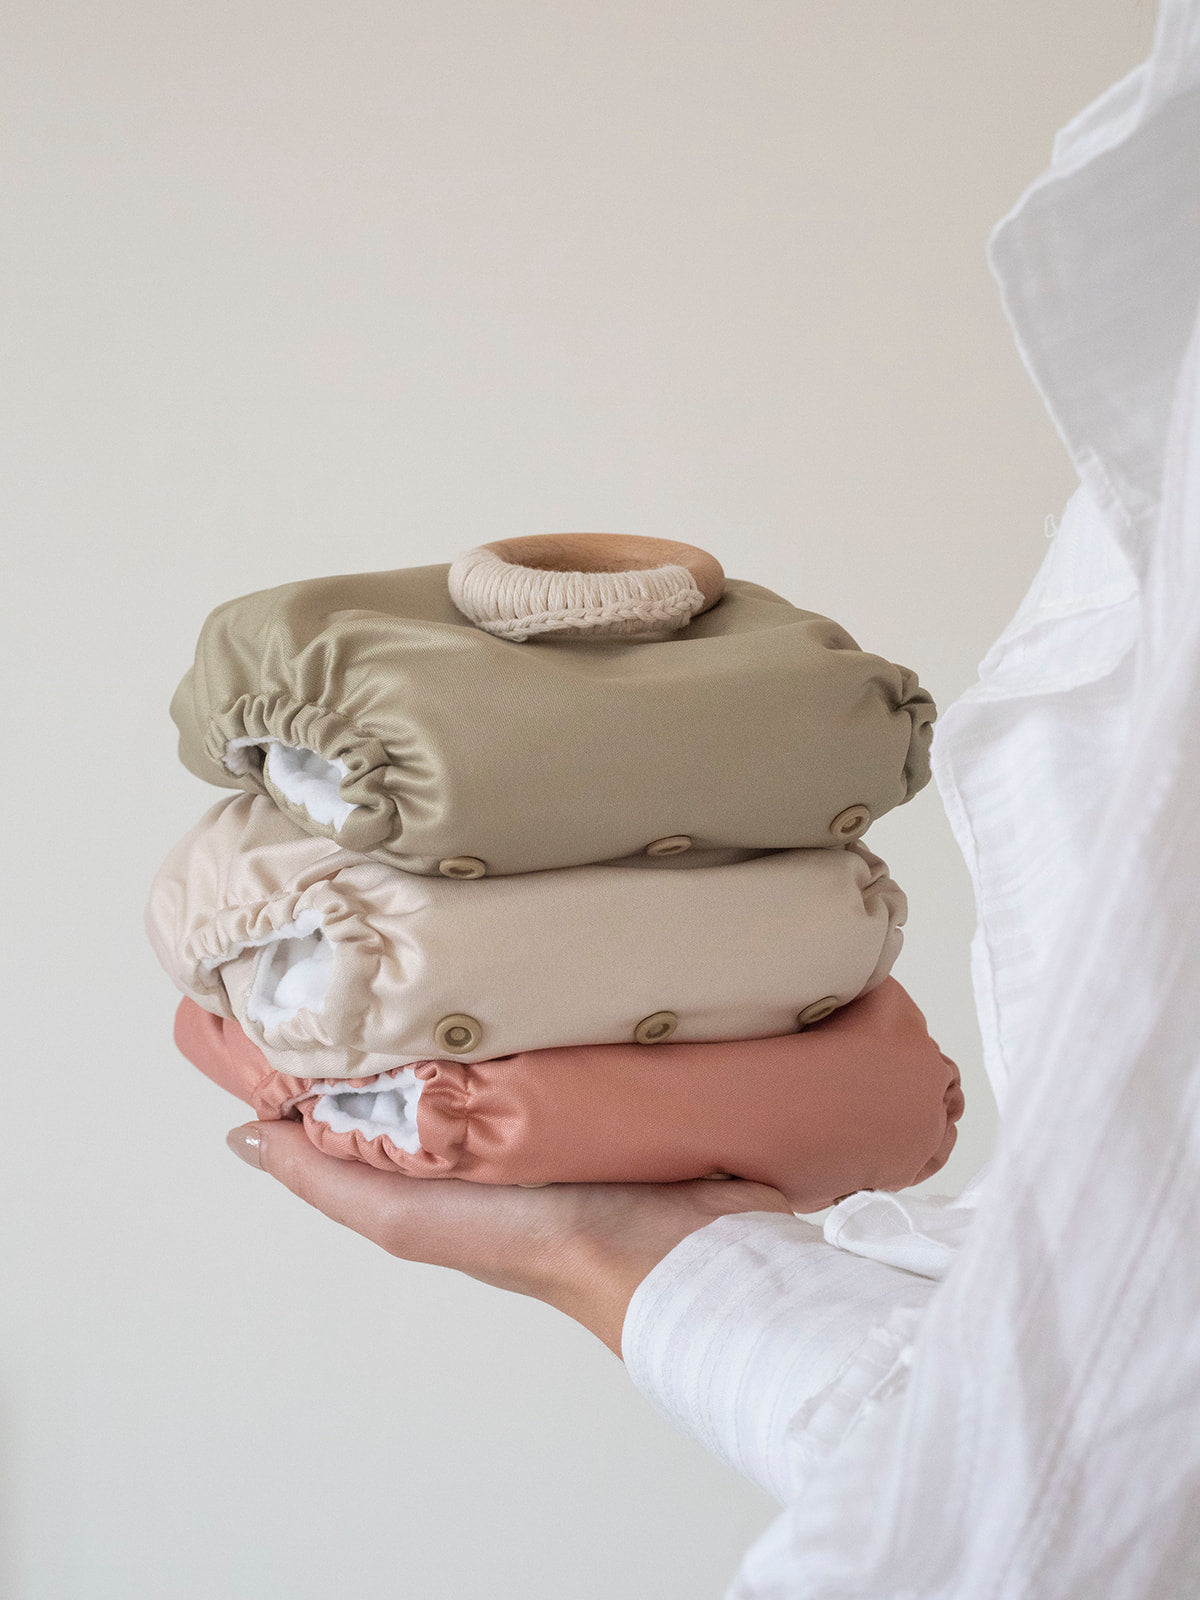 All about our new and improved Pim Pam nappies (and why they’re even better than before!)